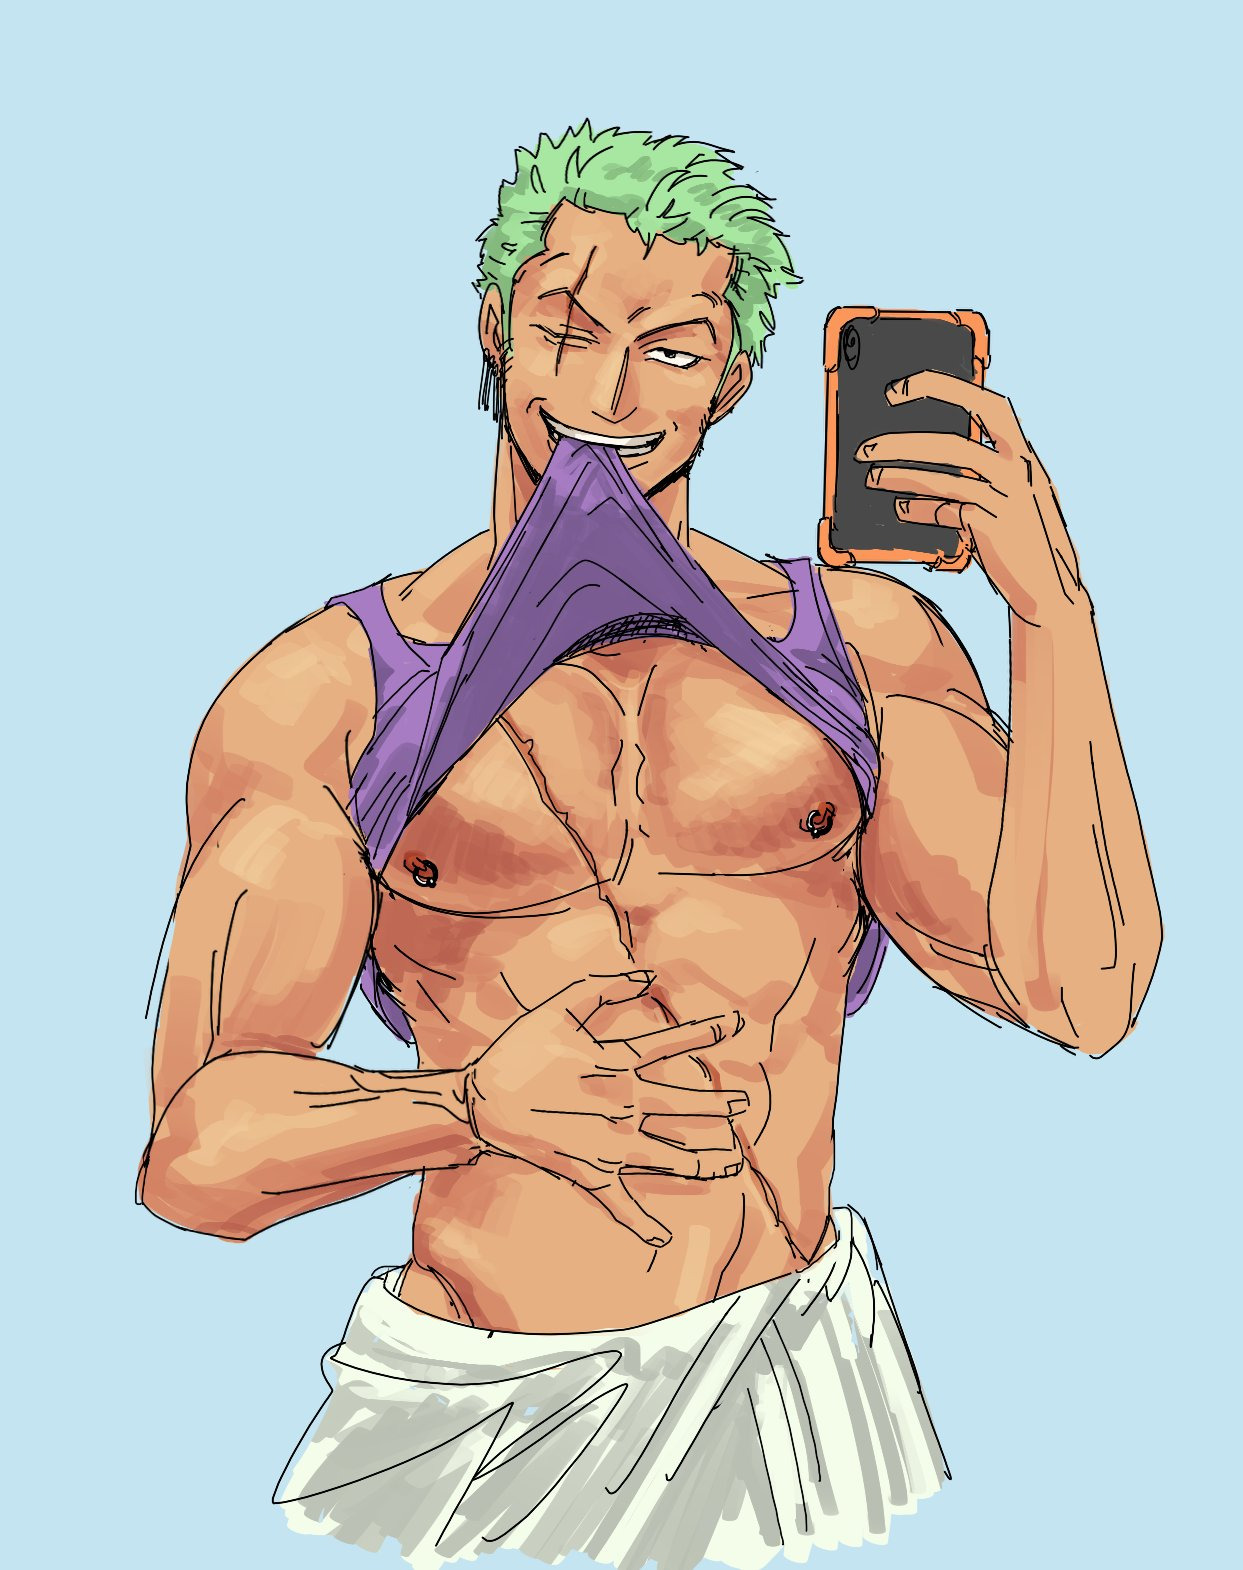 Thirst trap fanart of Zoro from One Piece in a modern setting taking a gym selfie. His scars and earrings are reversed as though shown through a mirror. He grins, using his teeth to lift up the hem of his shirt so who off his abs and pecs, including two pierced nipples.